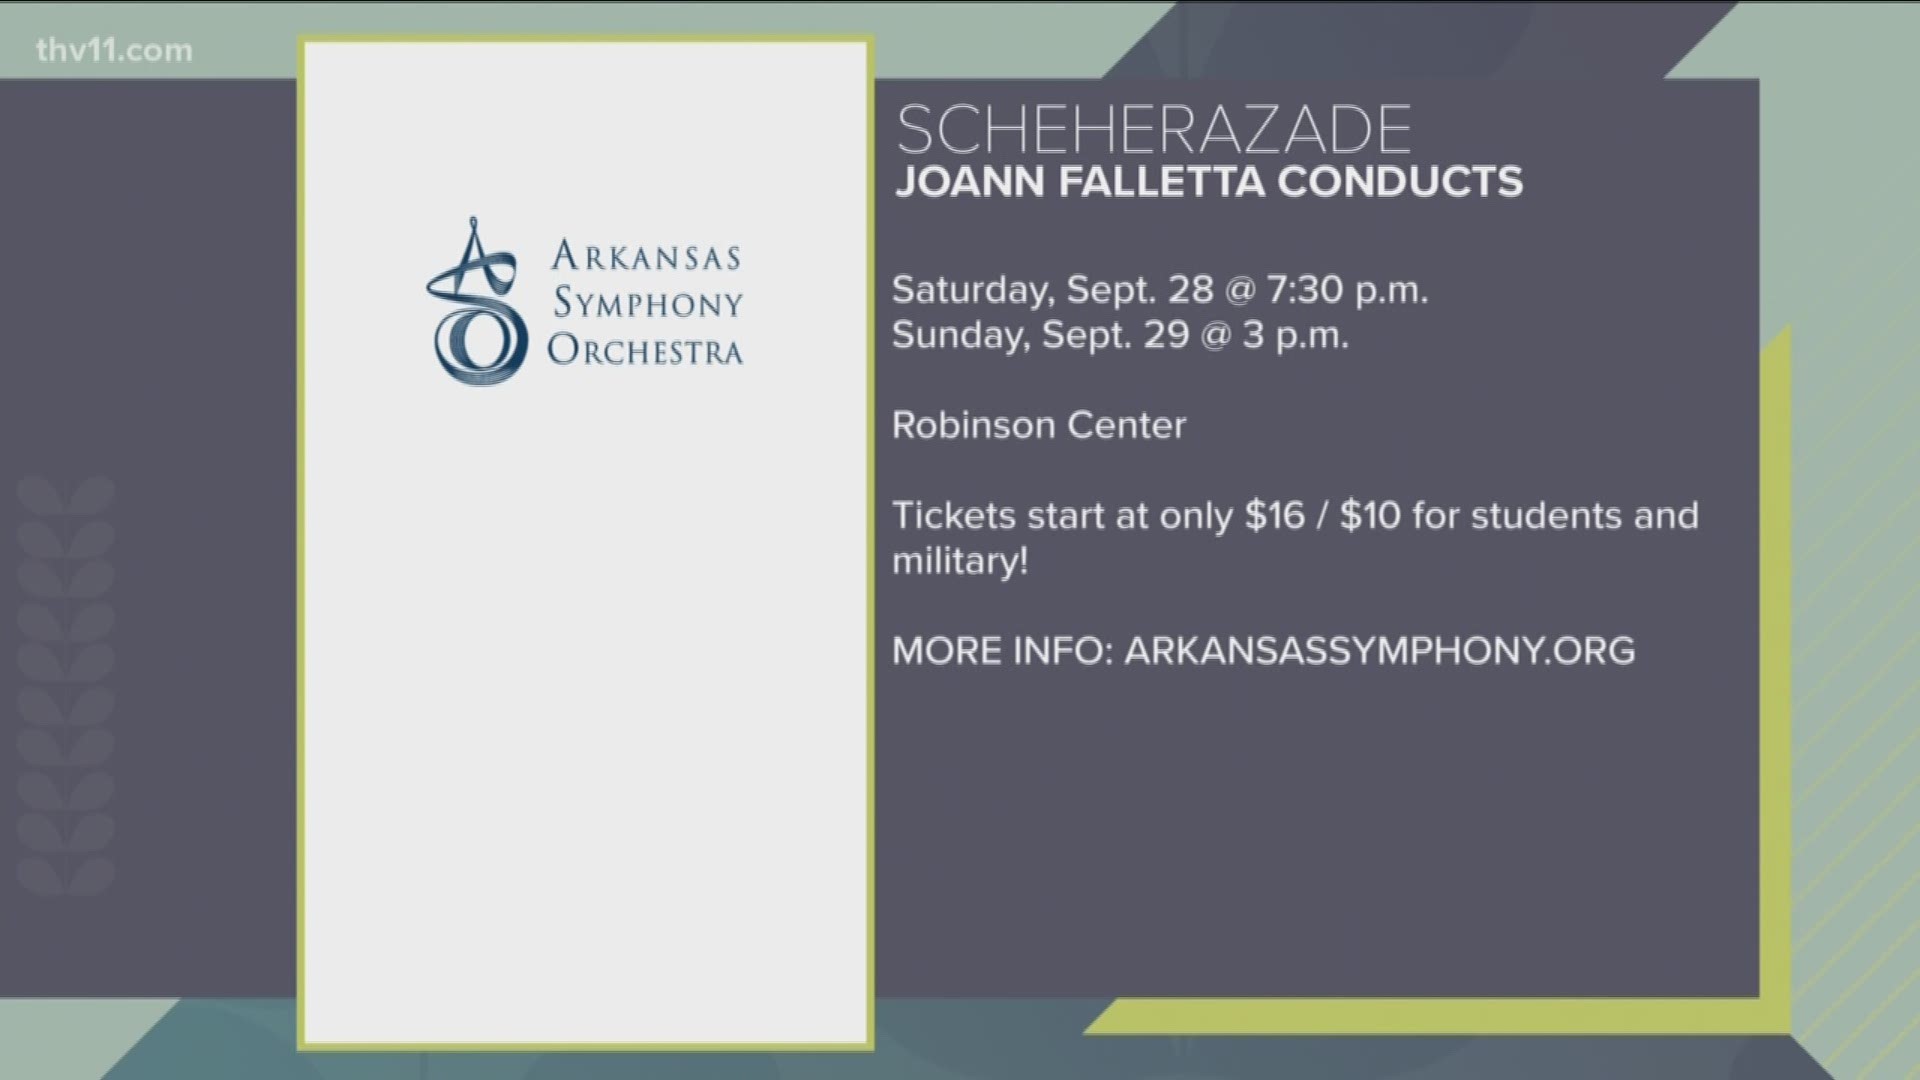 Arkansas Symphony Orchestra presents JoAnn Falletta Conducts Scheherazade with guest artists! JoAnn Falletta is a very influential conductor.